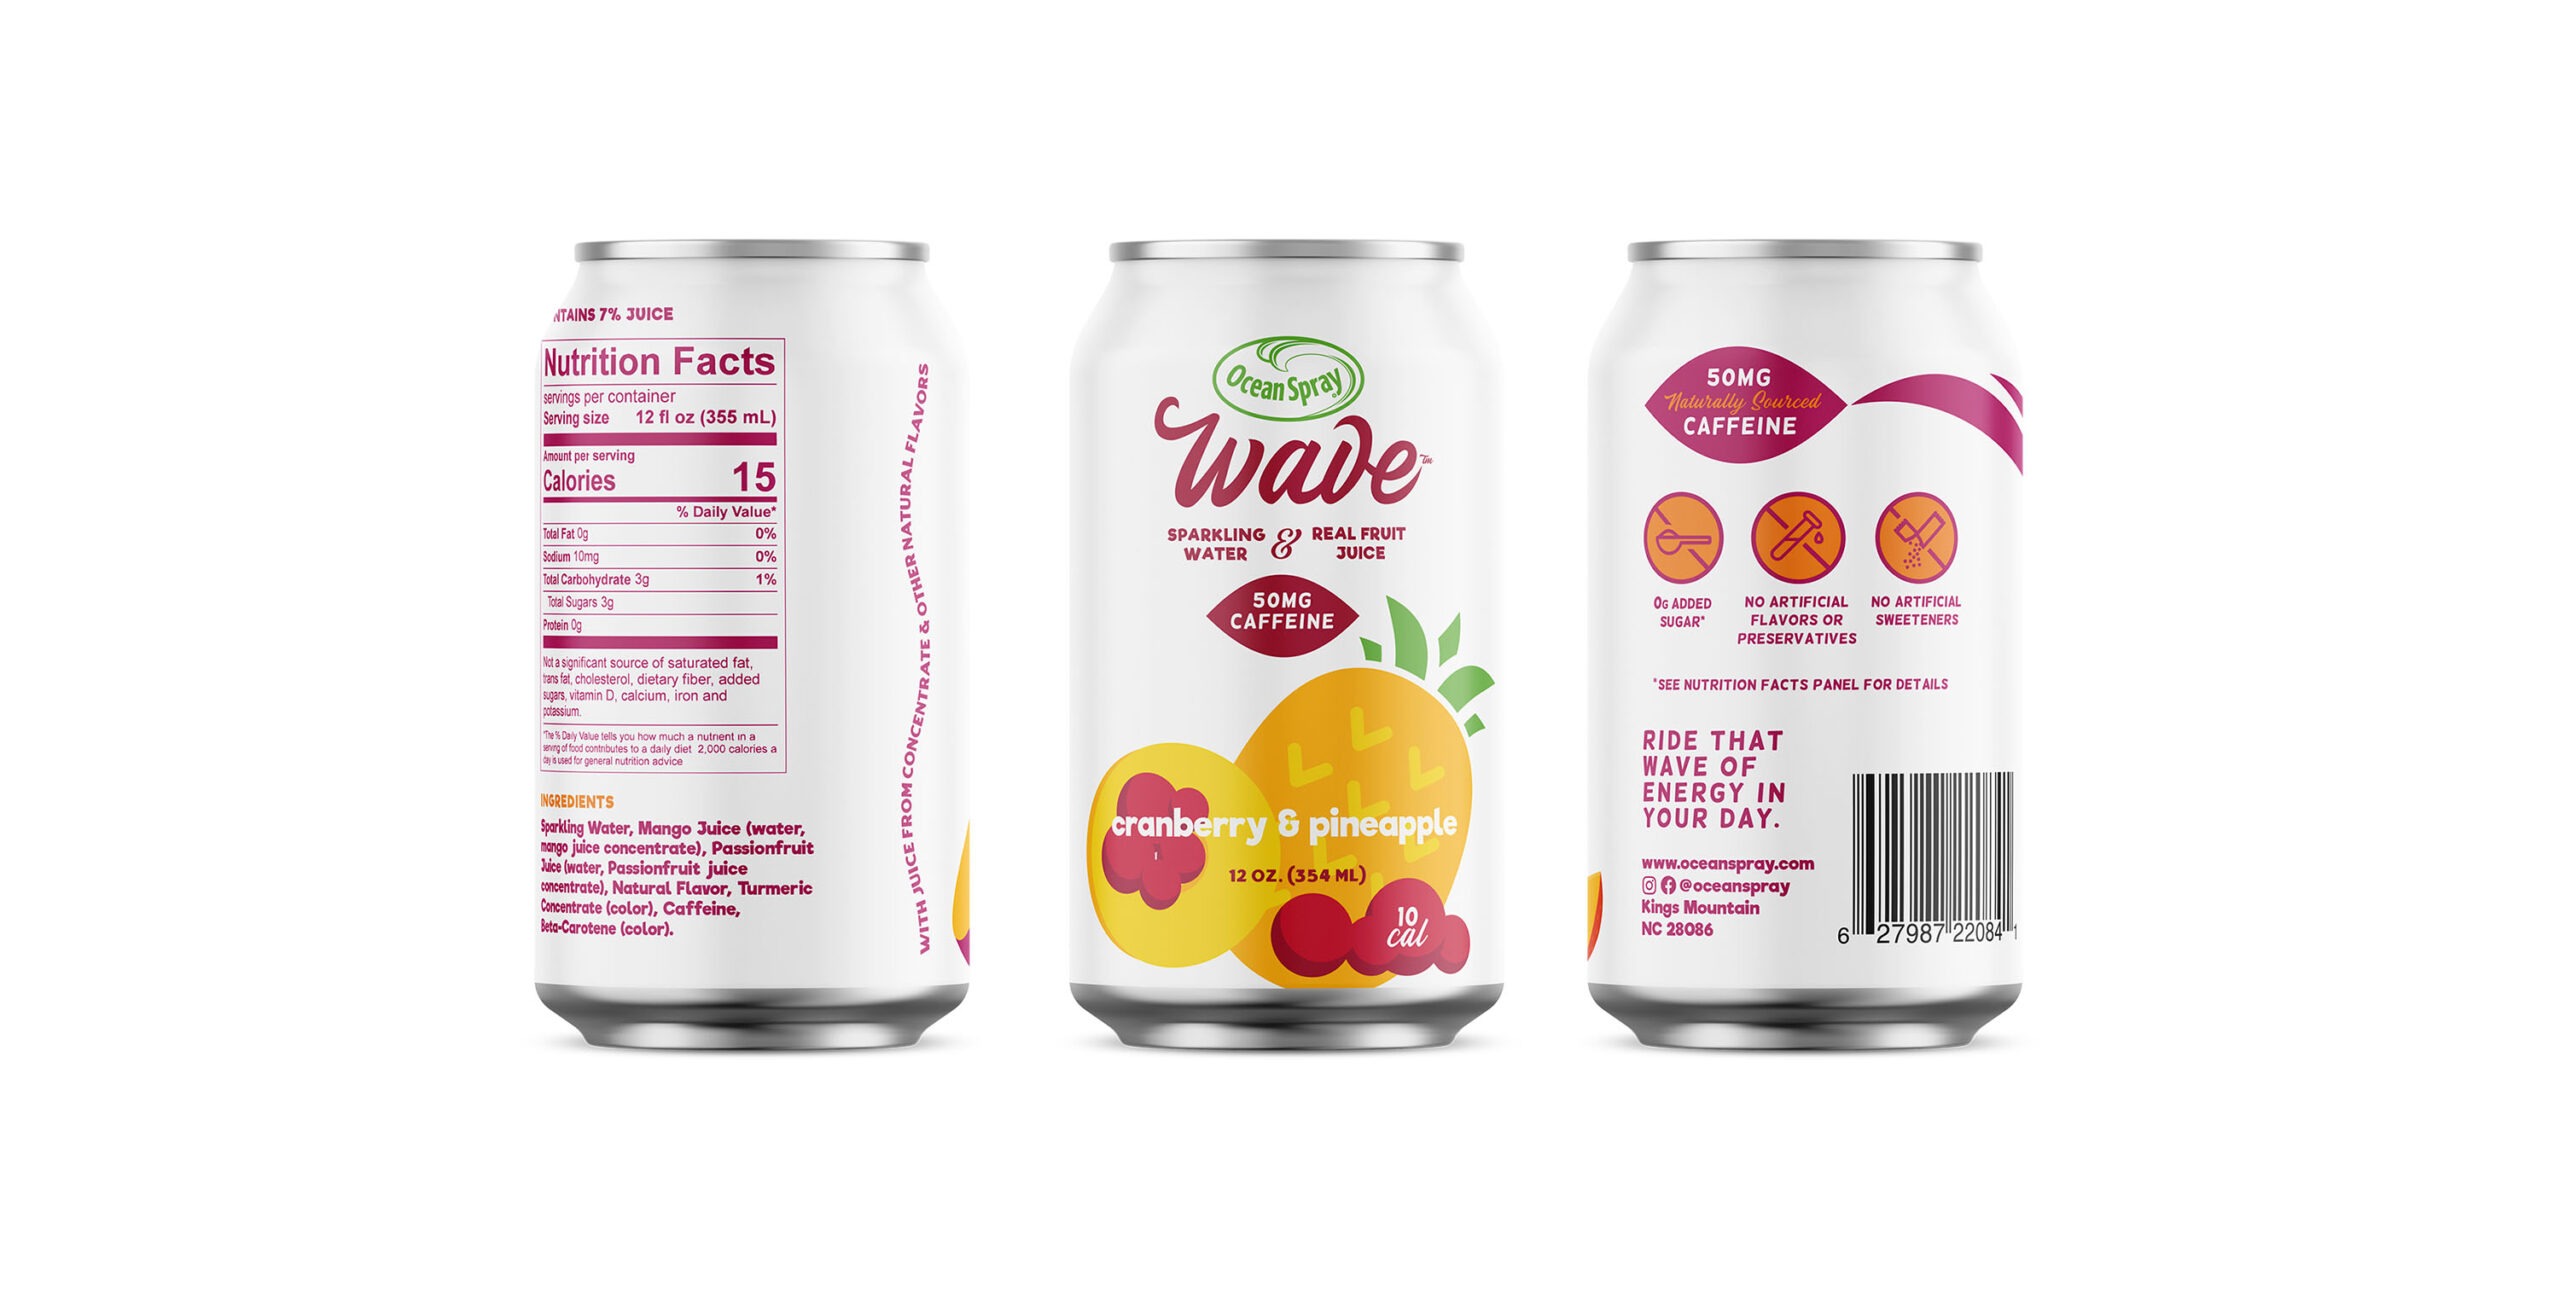 https://zestybrands.ca/wp-content/uploads/2022/09/Ocean-Spray-Wave-Soda-can-package-design-vancouver-Pineapple-Cranberry-2-scaled.jpg